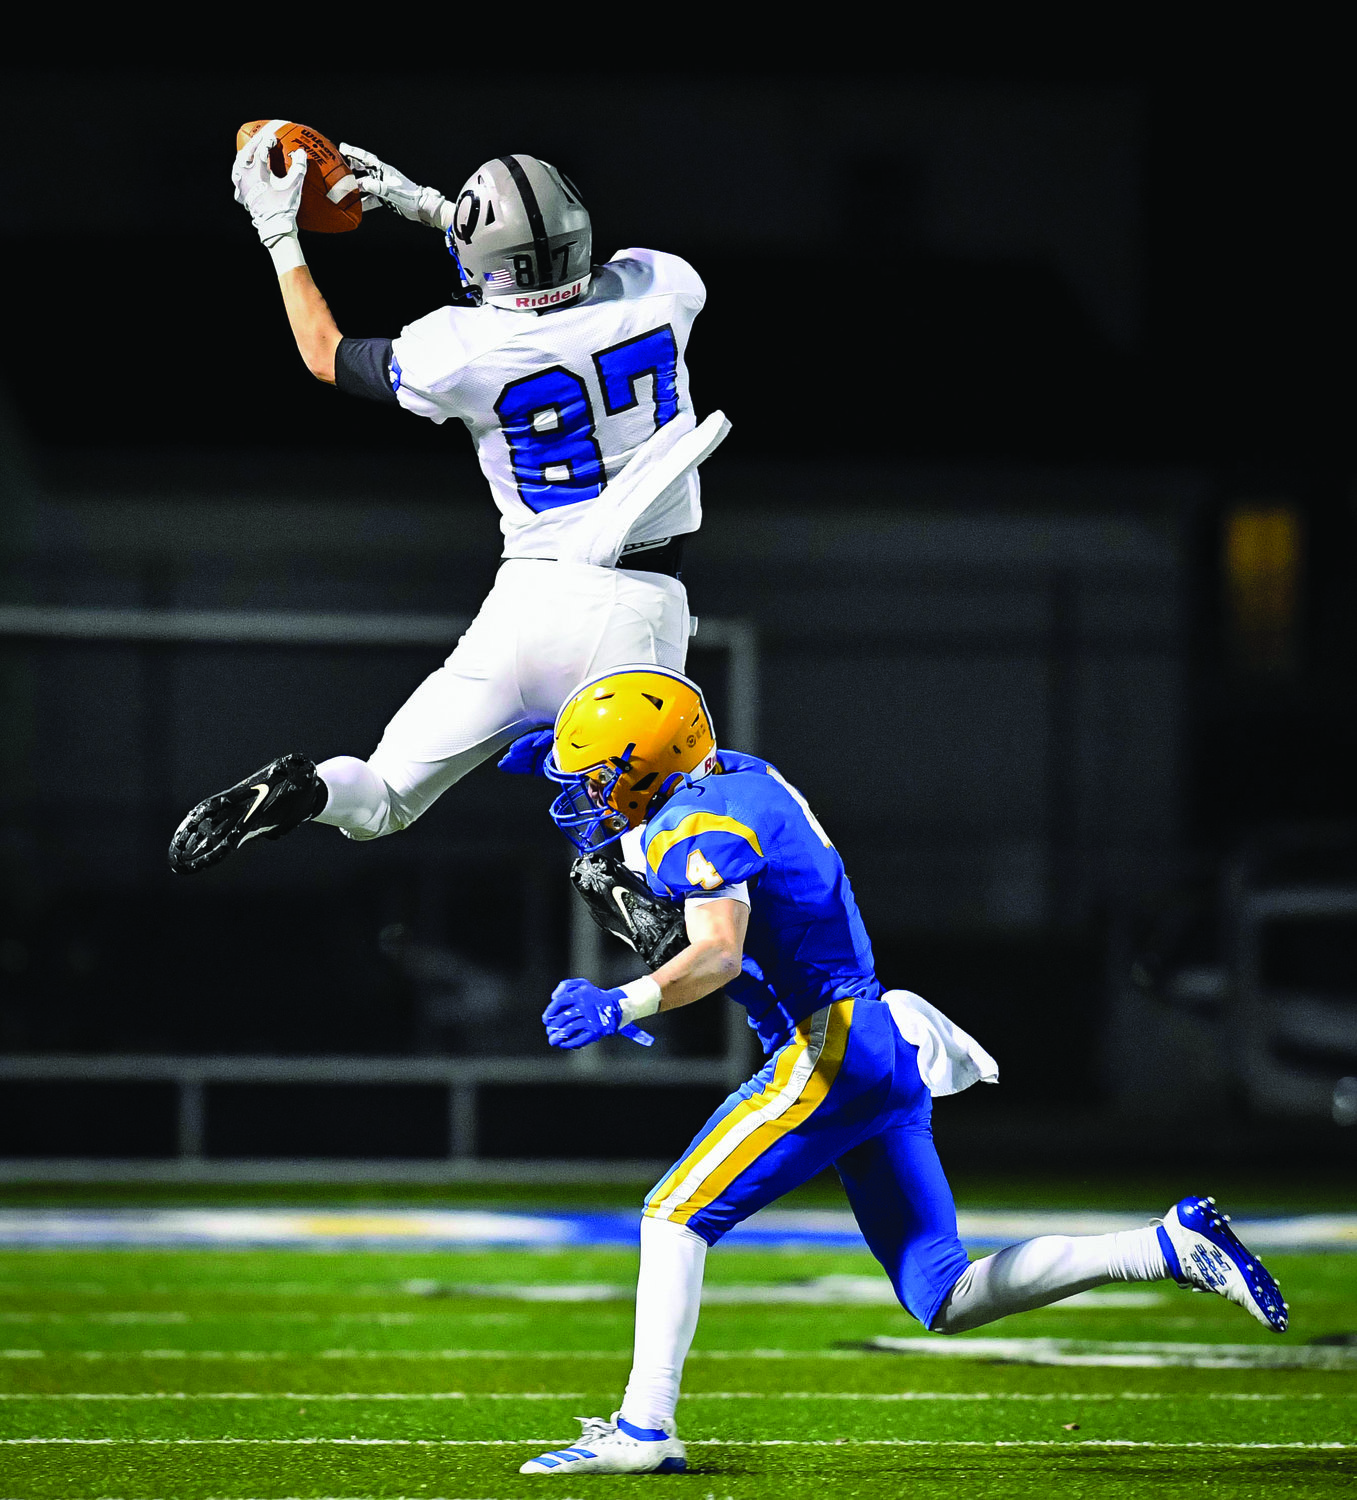 Quakertown’s Zach Fondl goes up to grab a pass from Will Steich in front of Downingtown East’s Duke Hetherington.